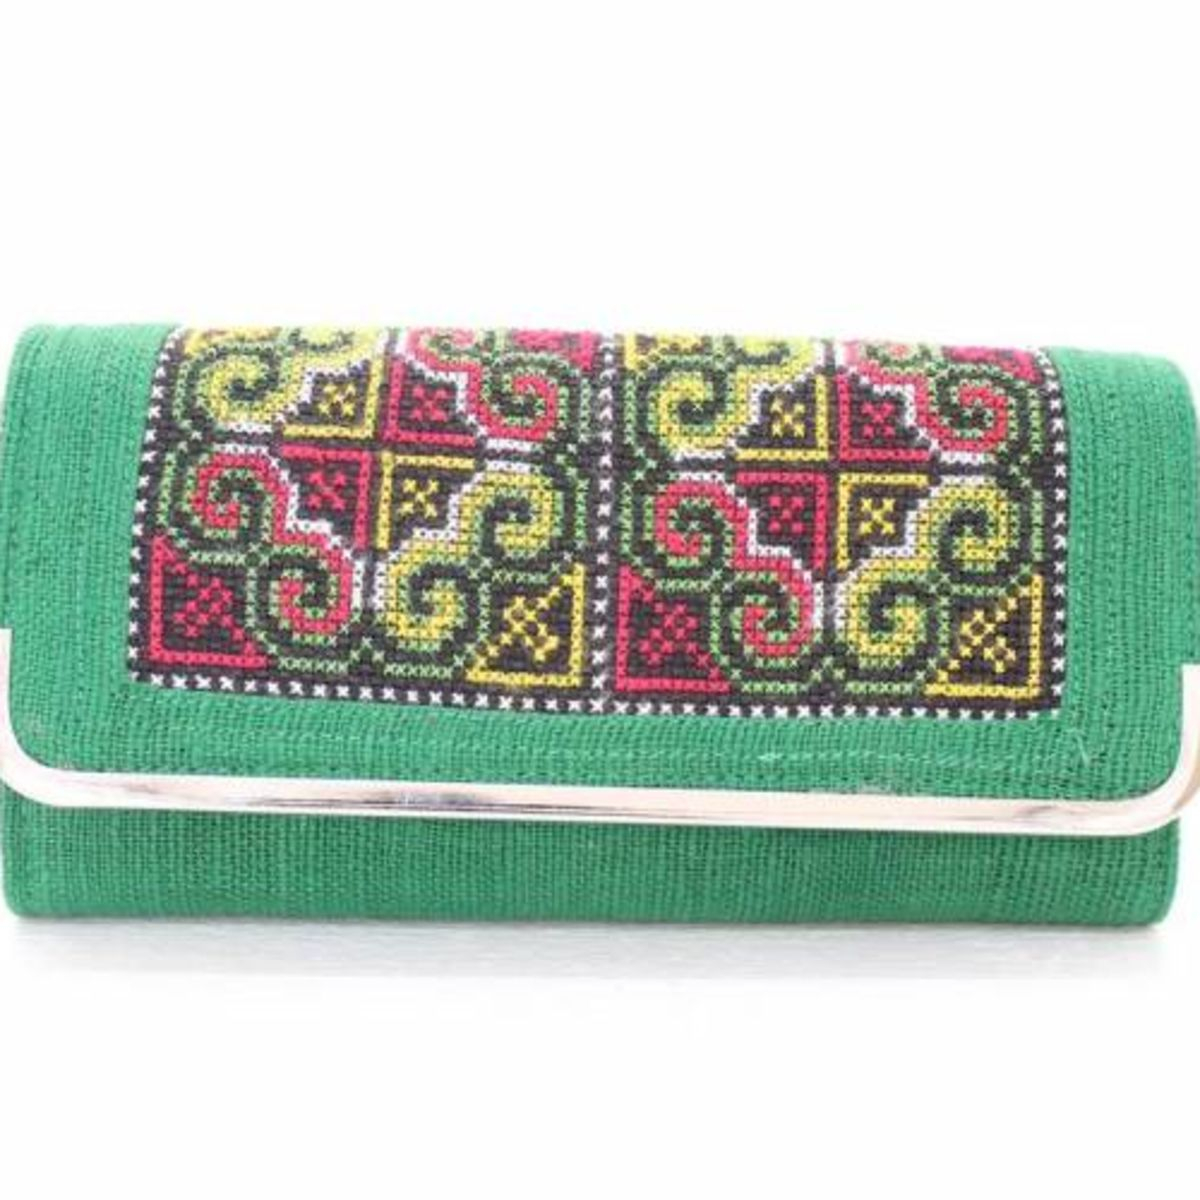 Hmong Embroidery Patterns Elegant Hmong Embroidery Hemp Wallet Discovered